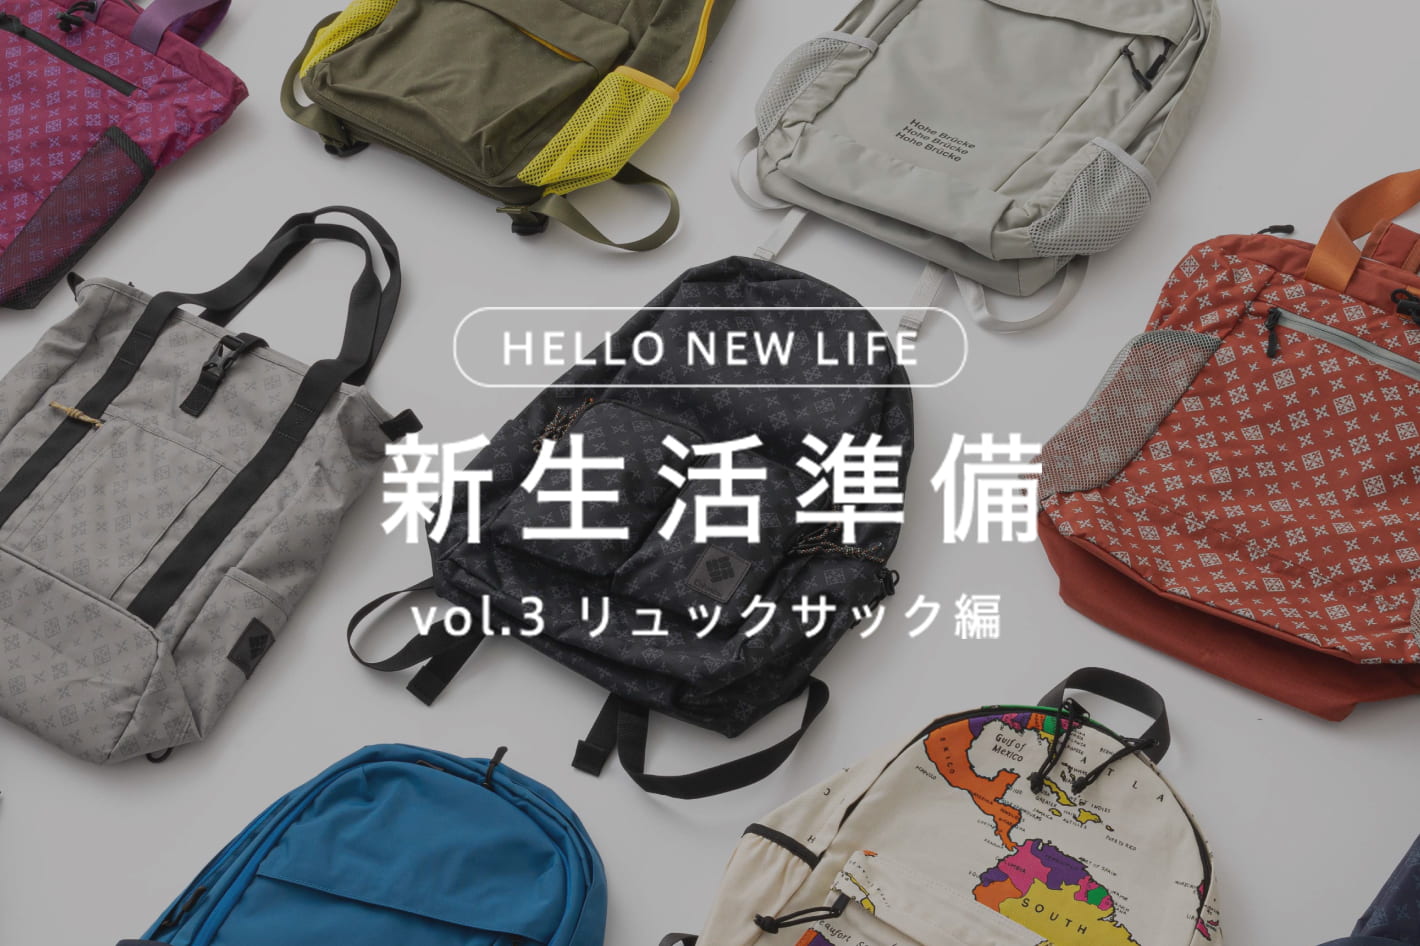 Daily russet ◆HELLO NEW LIFE！◆ 「新生活準備」 - vol.3 リュックサック編 -